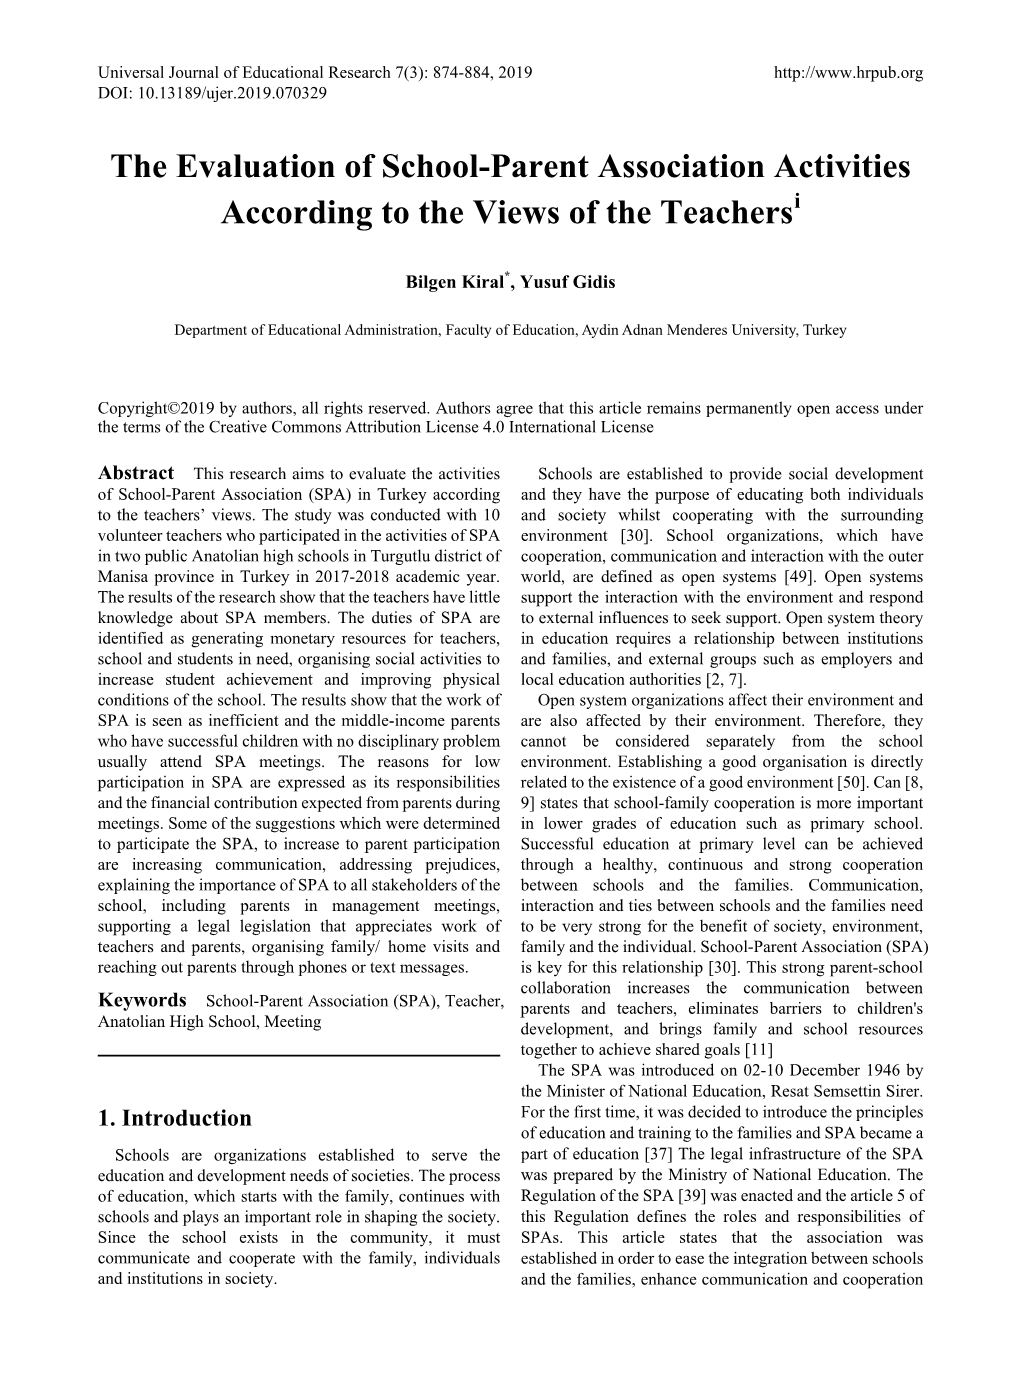 The Evaluation of School-Parent Association Activities According to the Views of the Teachersi